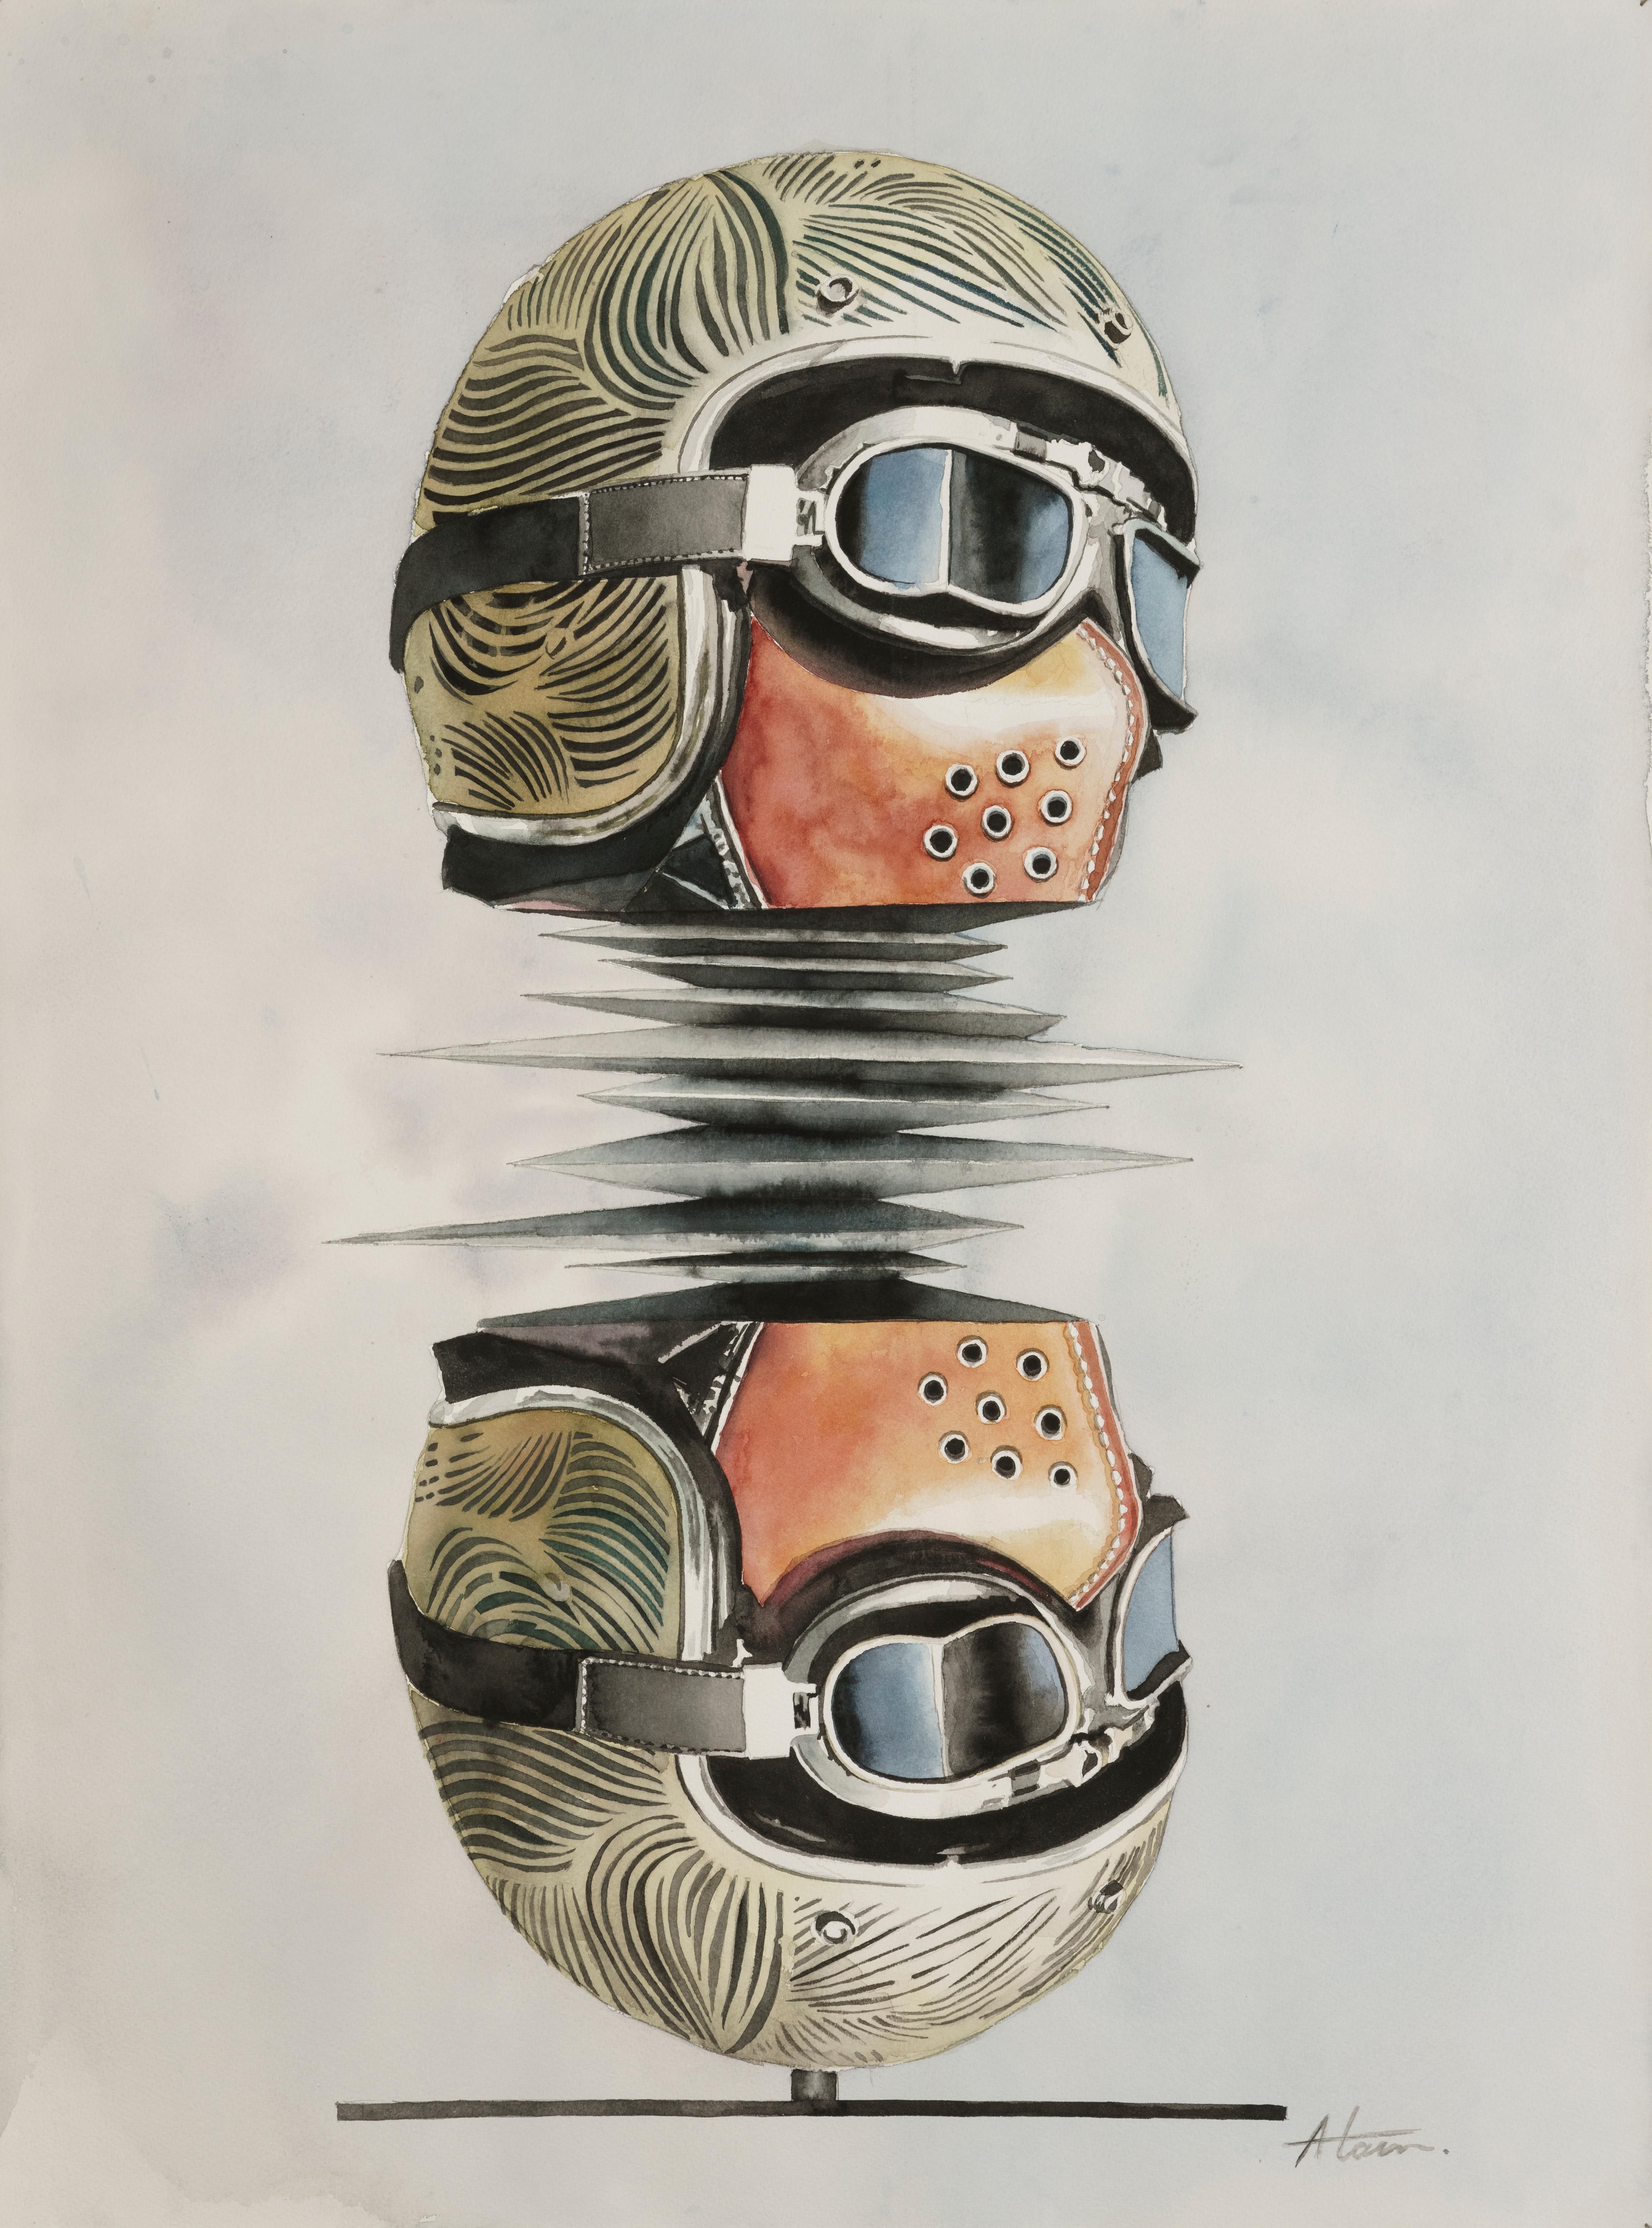 Alain Pino Figurative Painting - 'In the Other Side' Helmet Reflection Abstract Watercolor